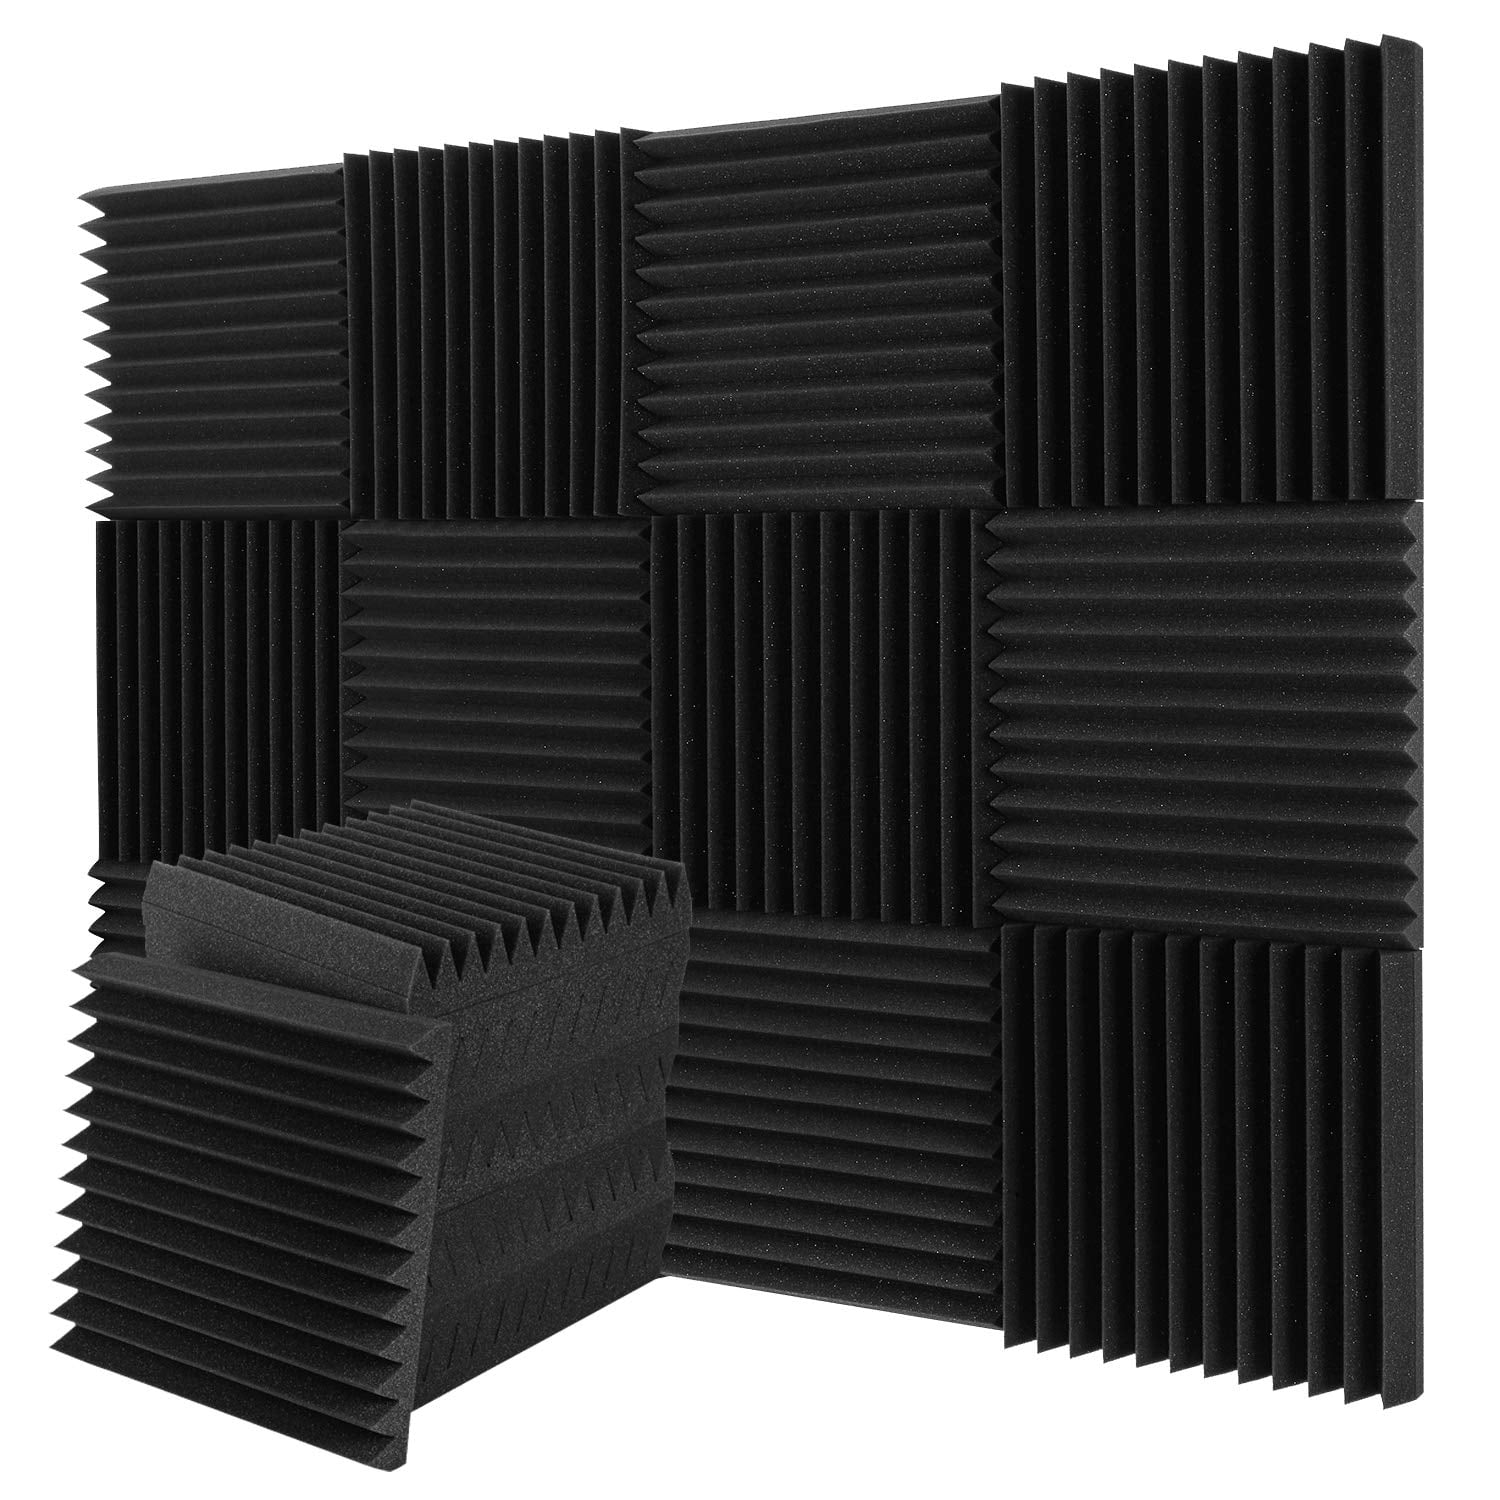 Donner 12-Pack Acoustic Panels Sound Proof Studio Foam for Walls, 2 x 12  x 12 Sound Absorbing Foam Panels Sound Insulation Panels Wedge Fireproof